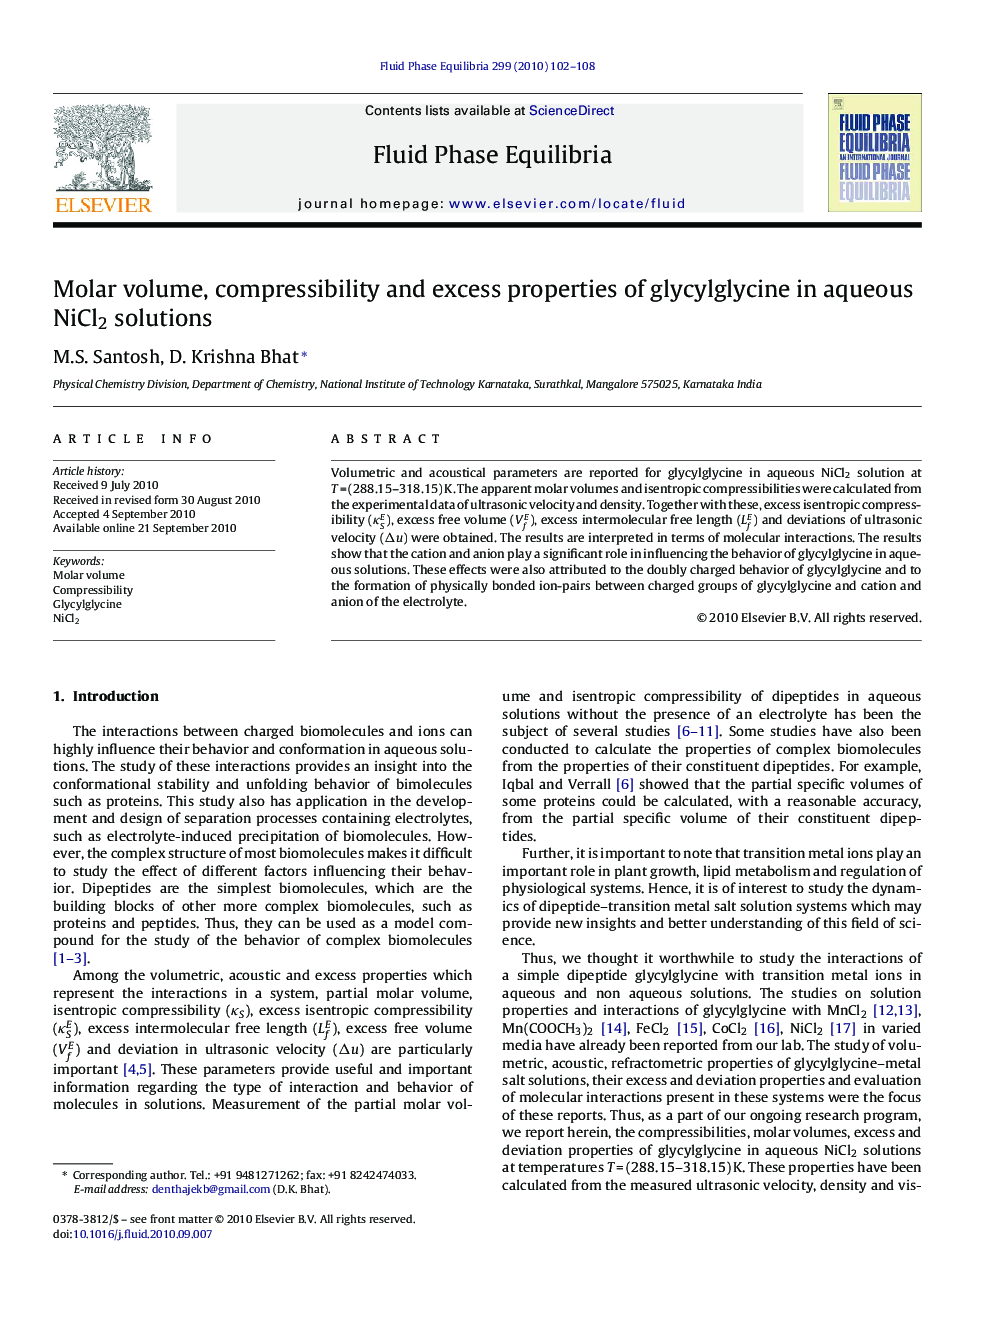 Molar volume, compressibility and excess properties of glycylglycine in aqueous NiCl2 solutions